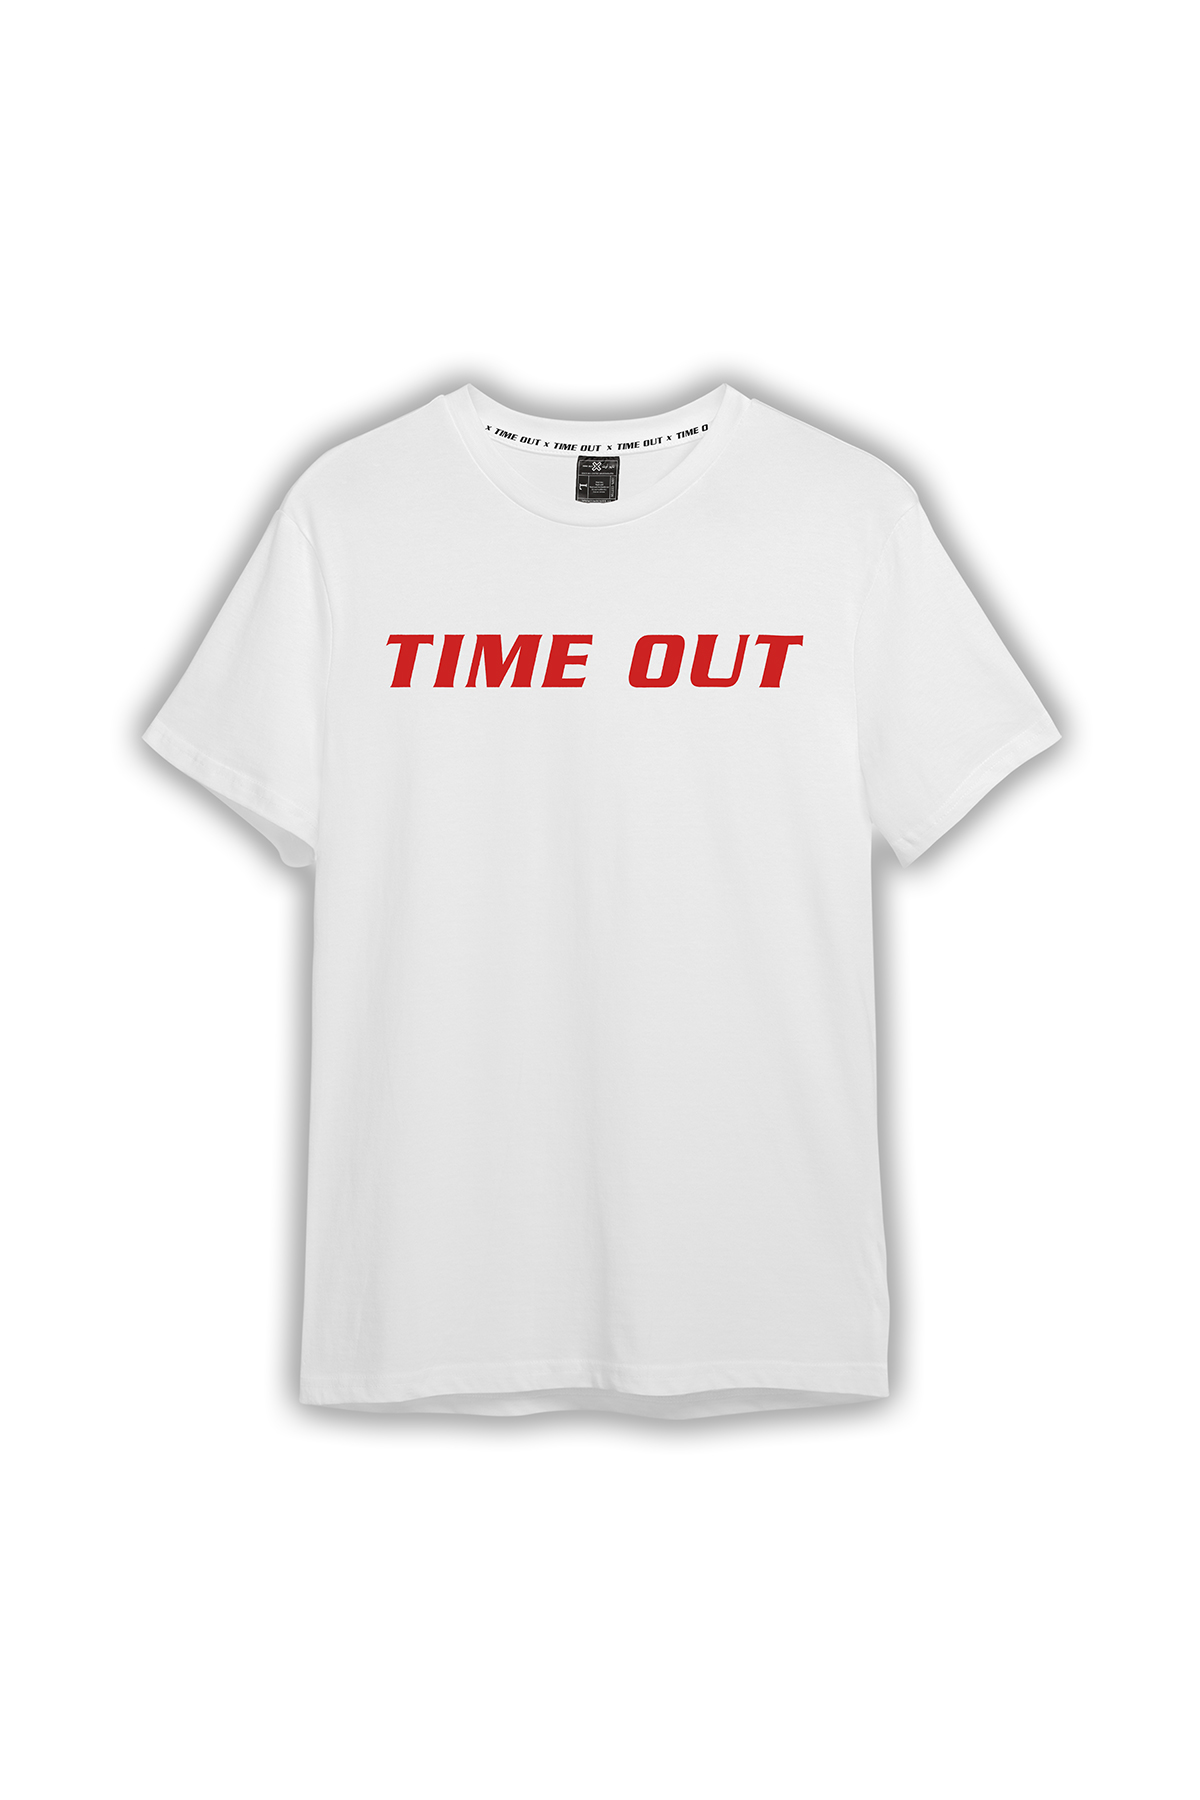 Unisex-Time-Out-X-Signature-Pure-Cotton-Fun-Pattern-White-T-shirt-for-Kids—Front